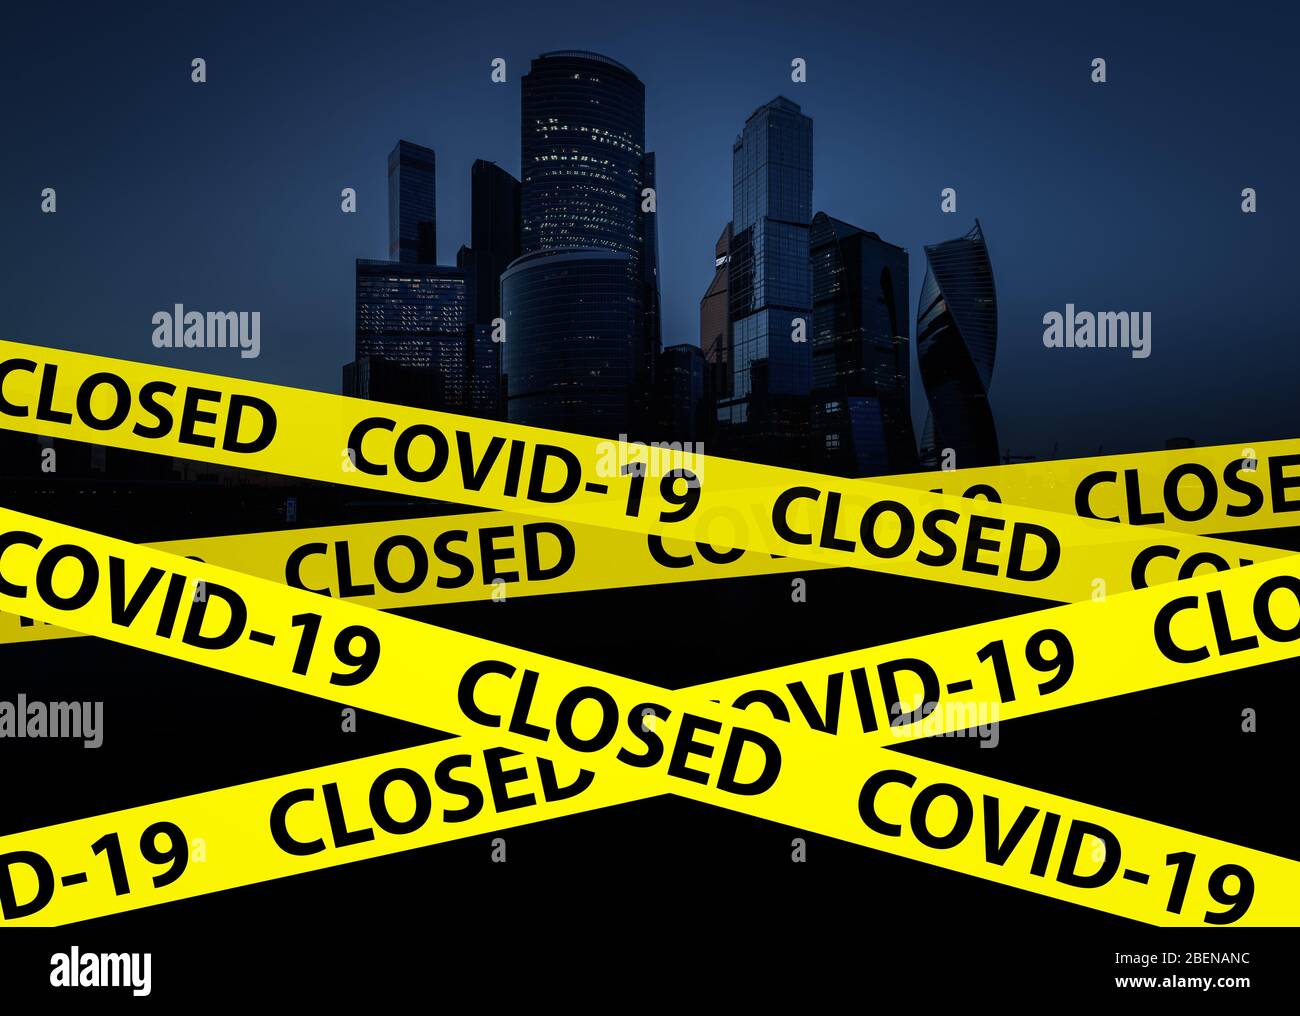 Coronavirus and quarantine concept, city closed with caution tape due to COVID-19. Offices, public places temporarily closed during coronavirus pandem Stock Photo